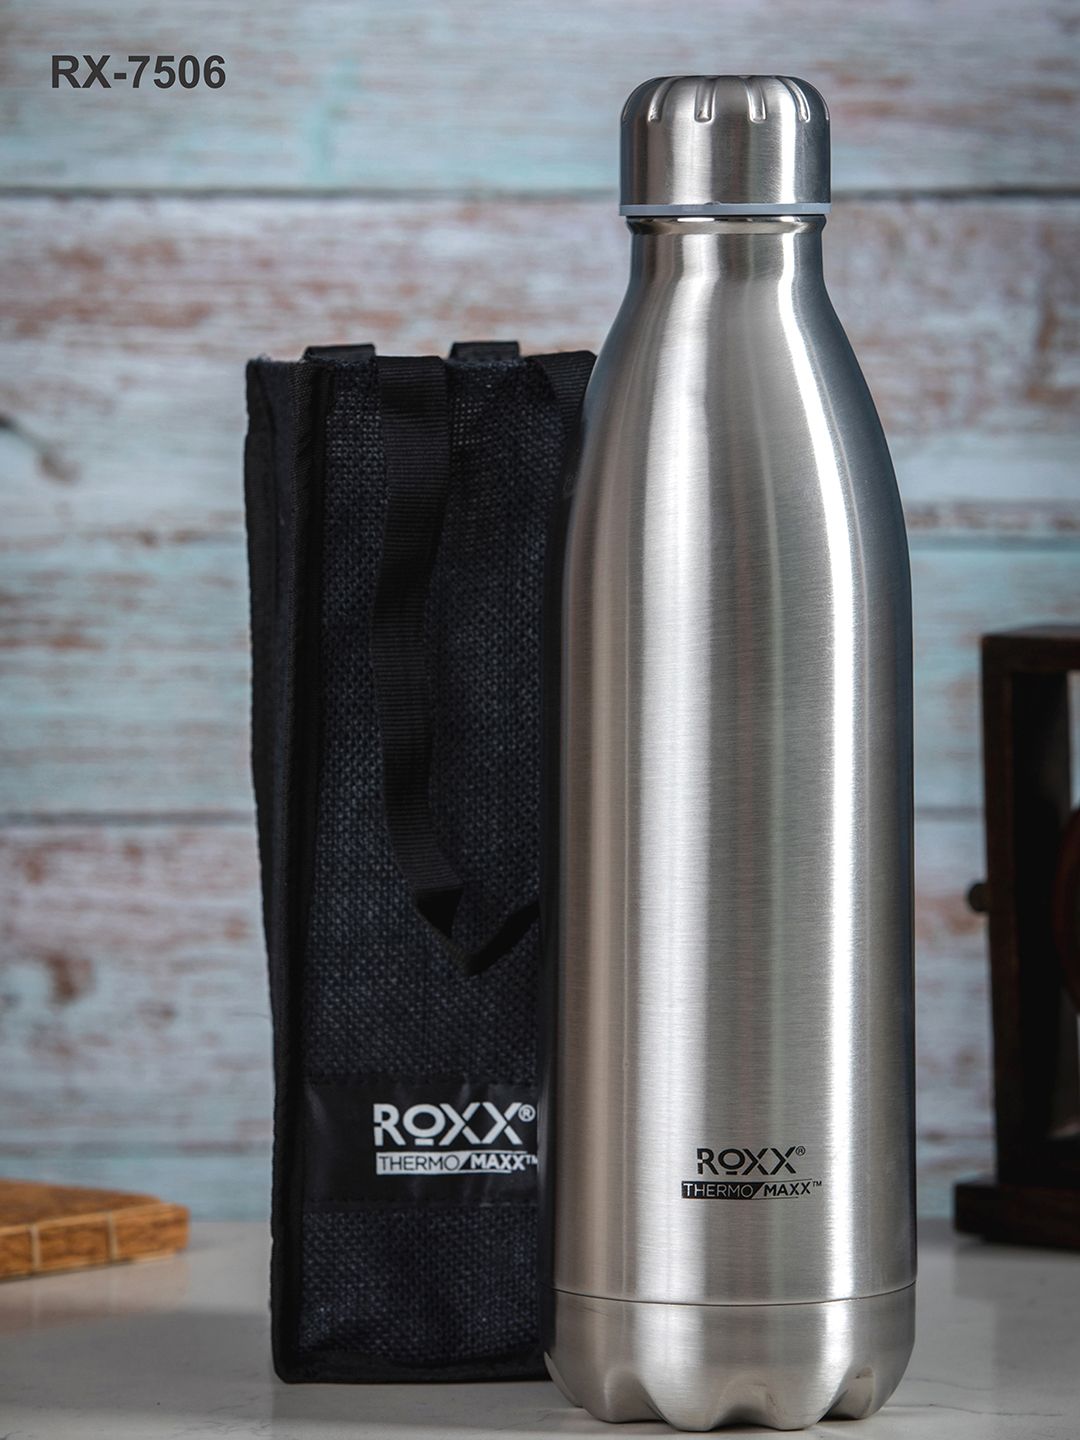 Roxx Silver-Coloured Solid Water Bottle Price in India